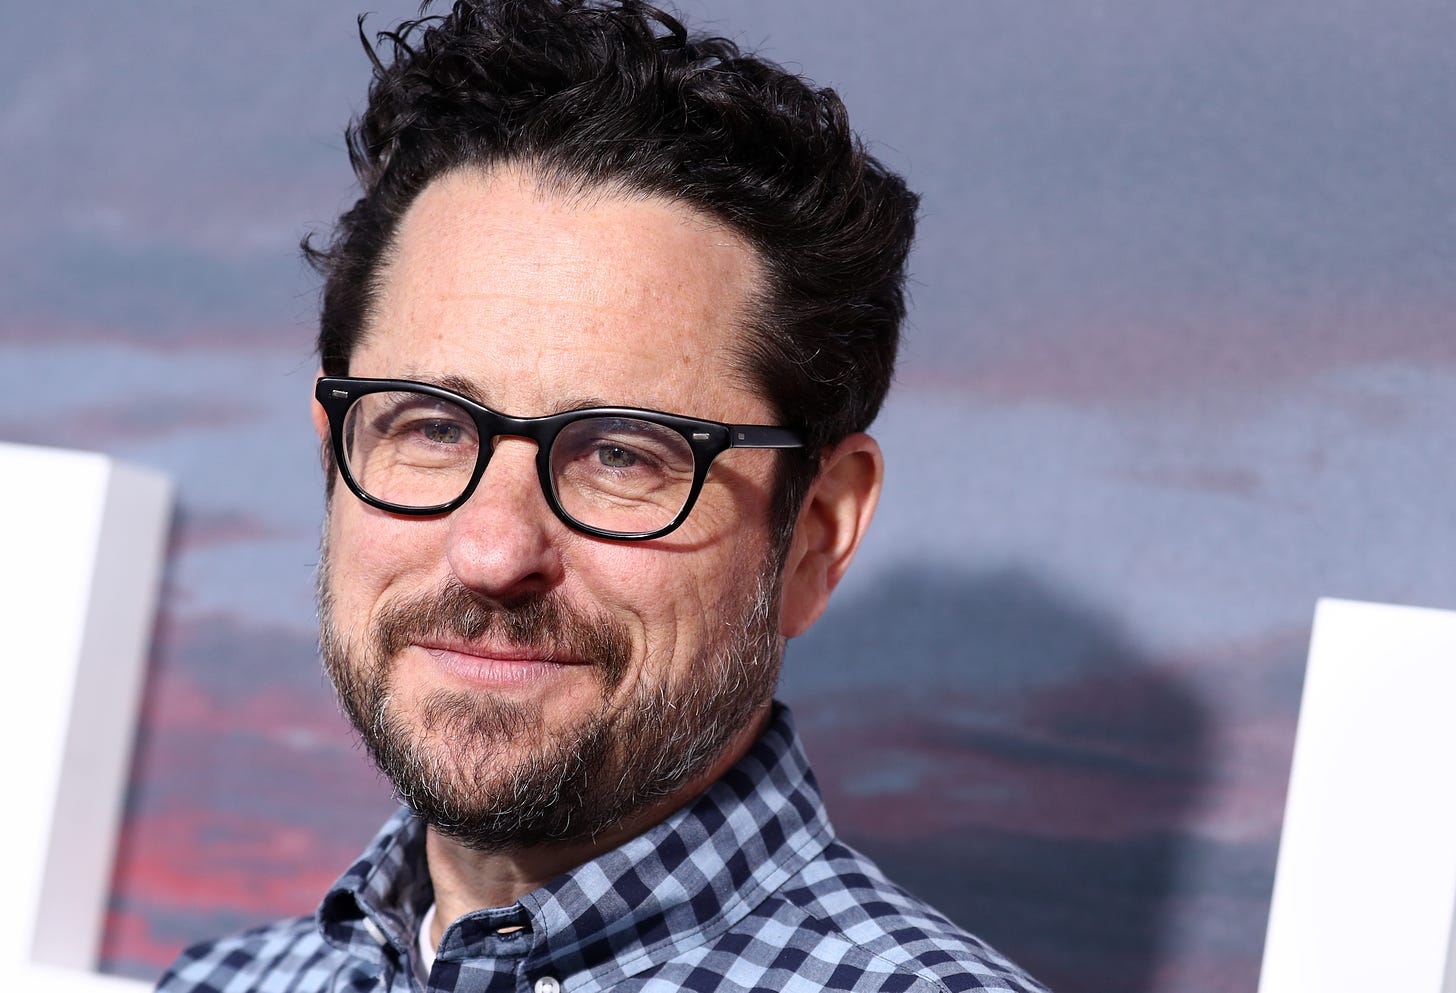 J.J. Abrams Responds to George Lucas' 'Force Awakens' Criticism | IndieWire